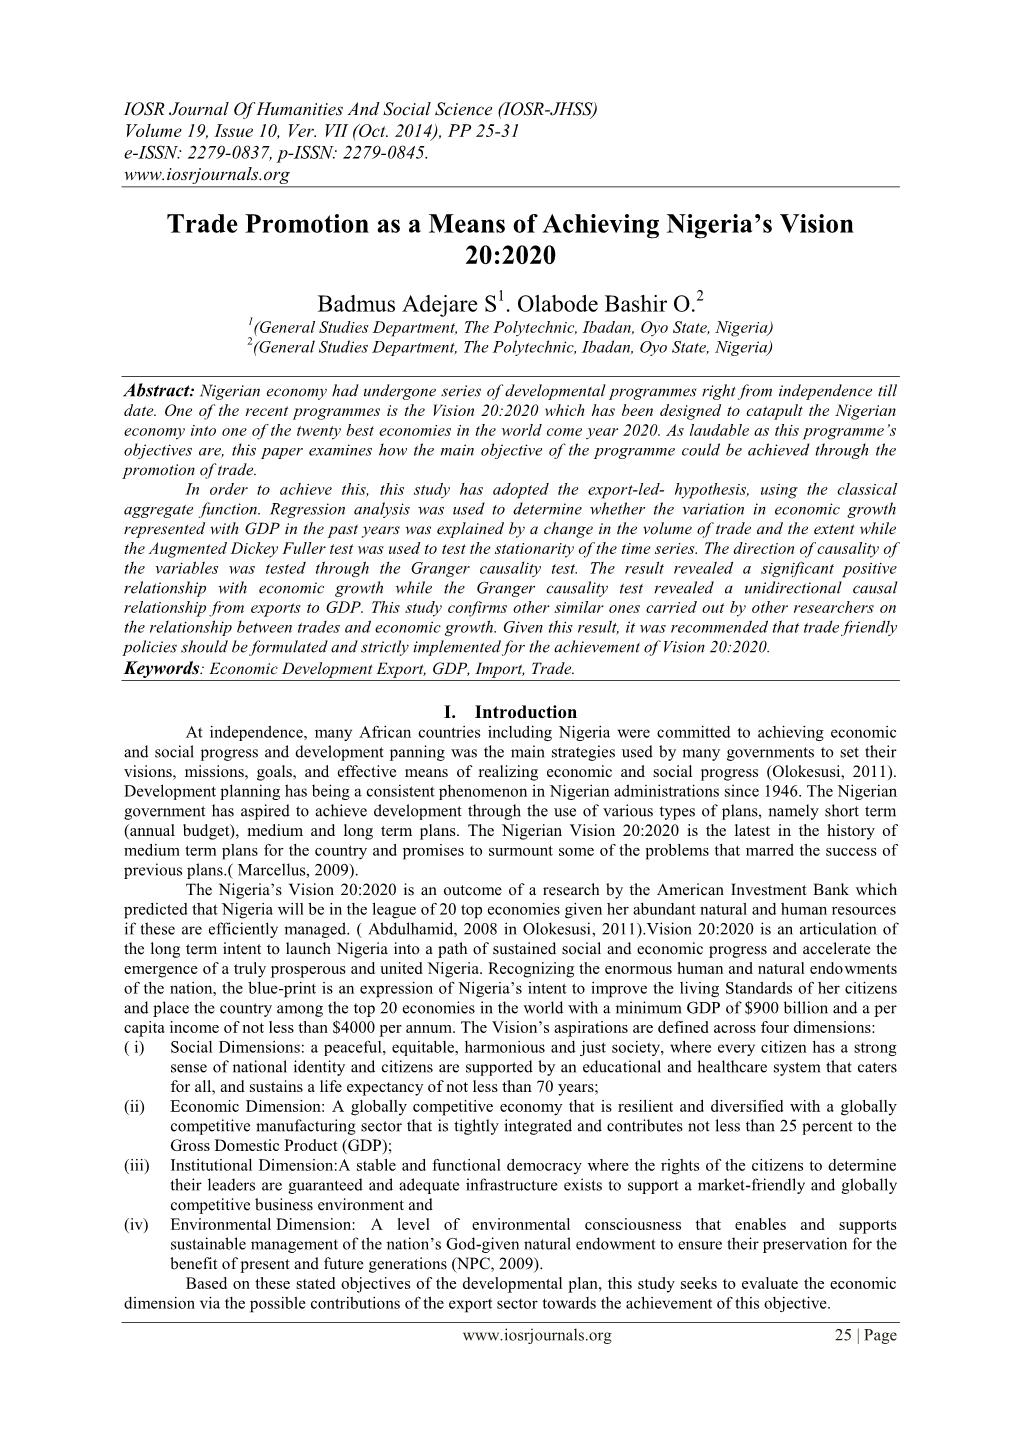 Trade Promotion As a Means of Achieving Nigeria's Vision 20:2020